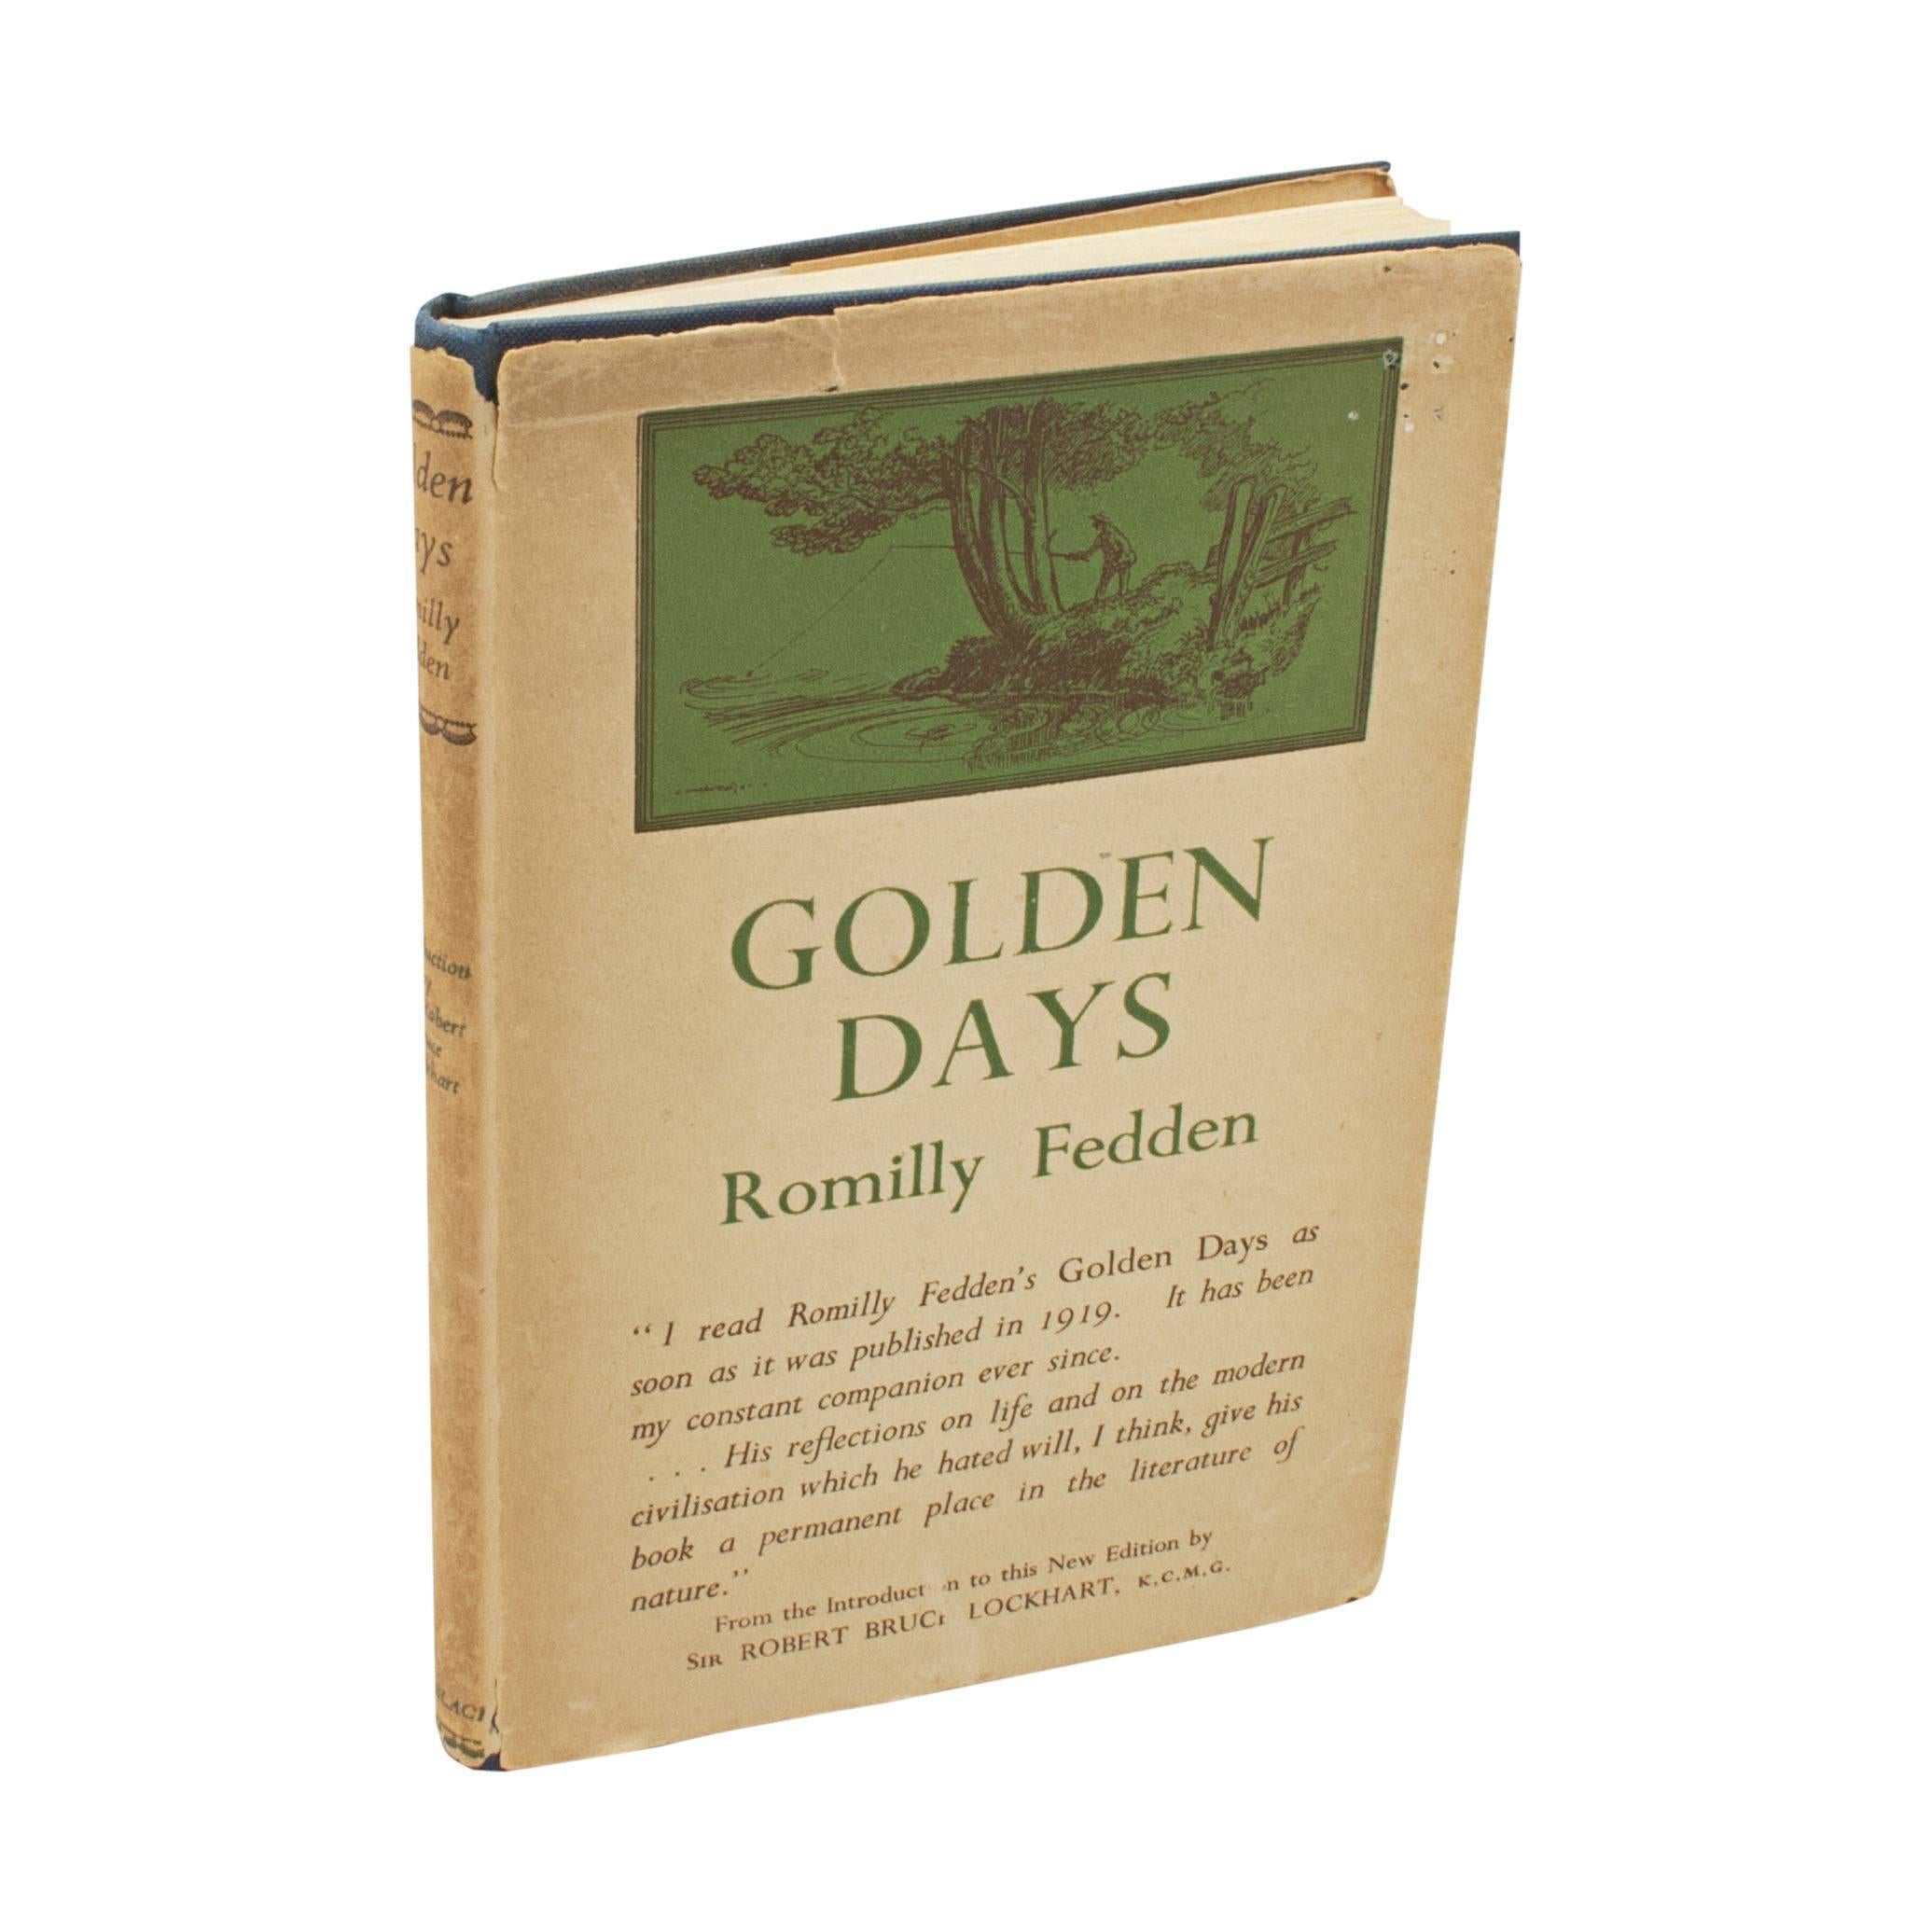 Vintage fishing book, golden days by Romilly Fedden
A good 1949 (2nd edition) angling book by Romilly Fedden entitled 'Golden Days' and printed in Great Britain by The bowering Press, Plymouth. This is a hard back copy with original blue cloth